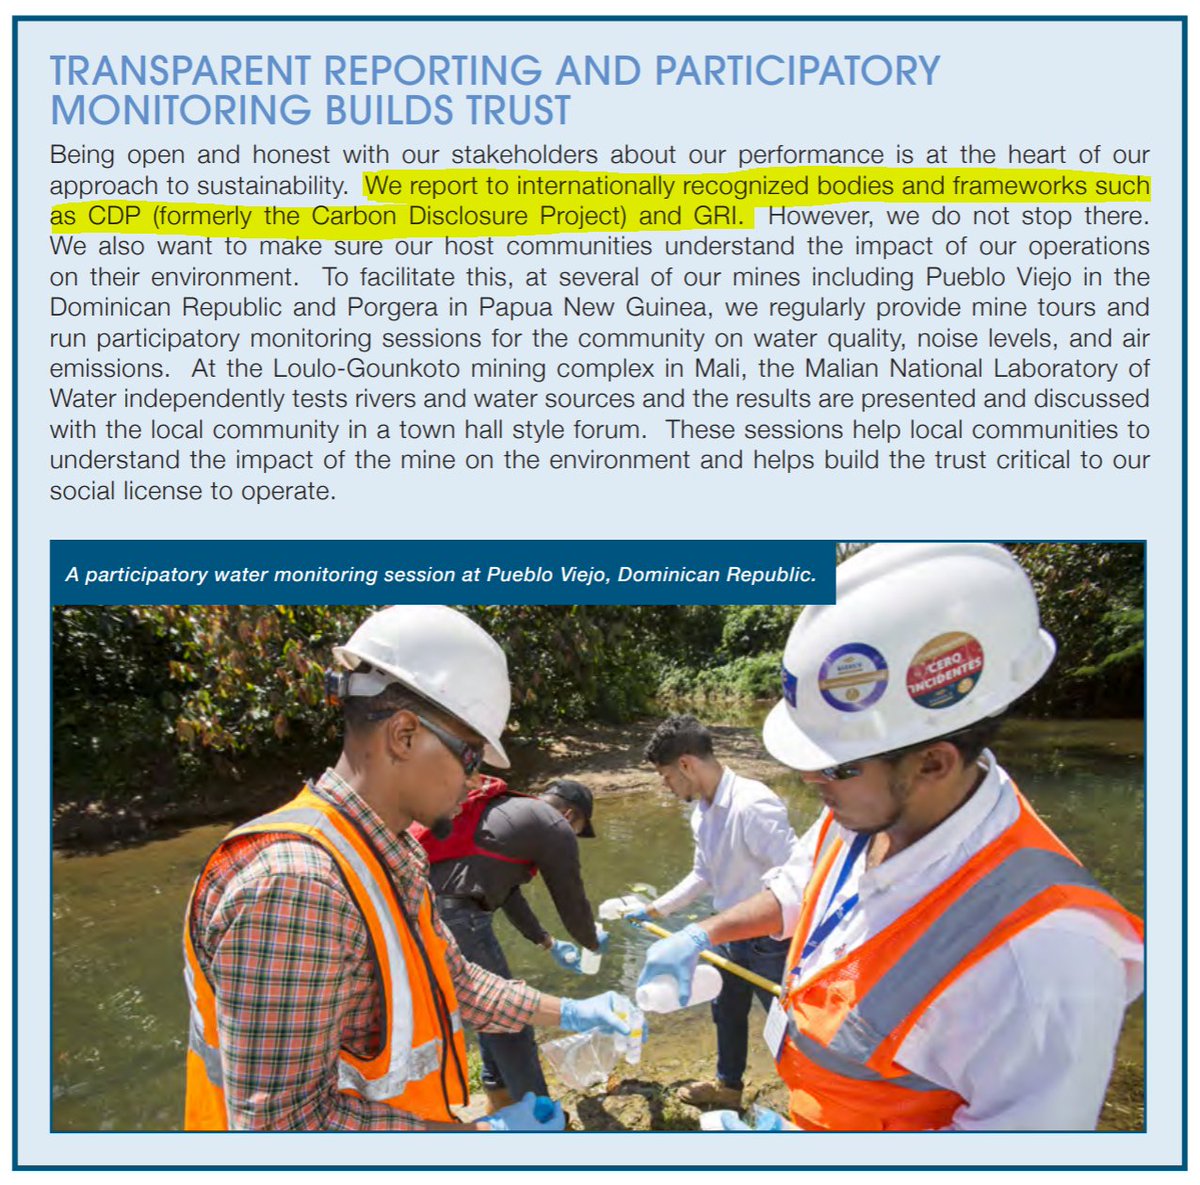  @BarrickGold "Serious about Sustainability"Spoiler: they aren't.Under title: "TRANSPARENT REPORTING" they talk about a CDP report that isn't available to download on their site or CDP's either. So transparent its invisible!("transparent" appears 34 times in 100 pages)